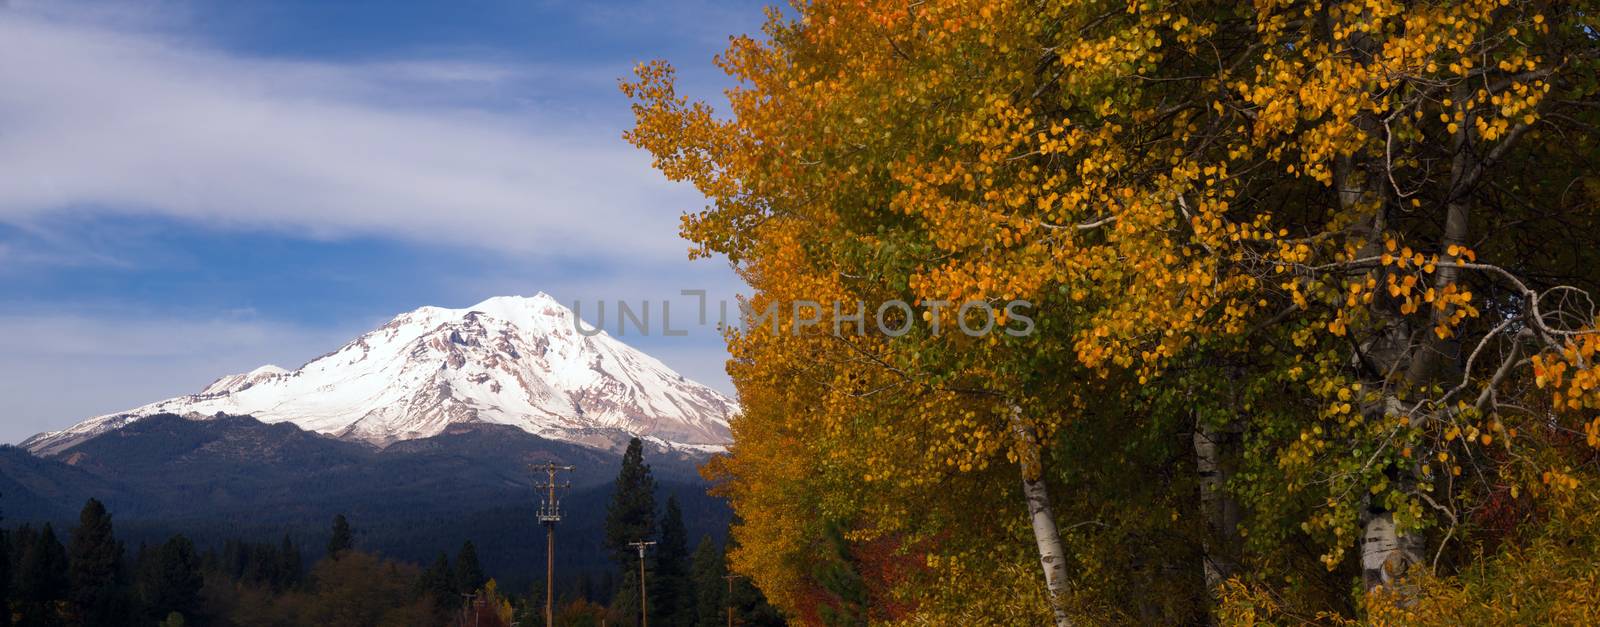 Mt Shasta Rural Fall Color California Nature Outdoor by ChrisBoswell